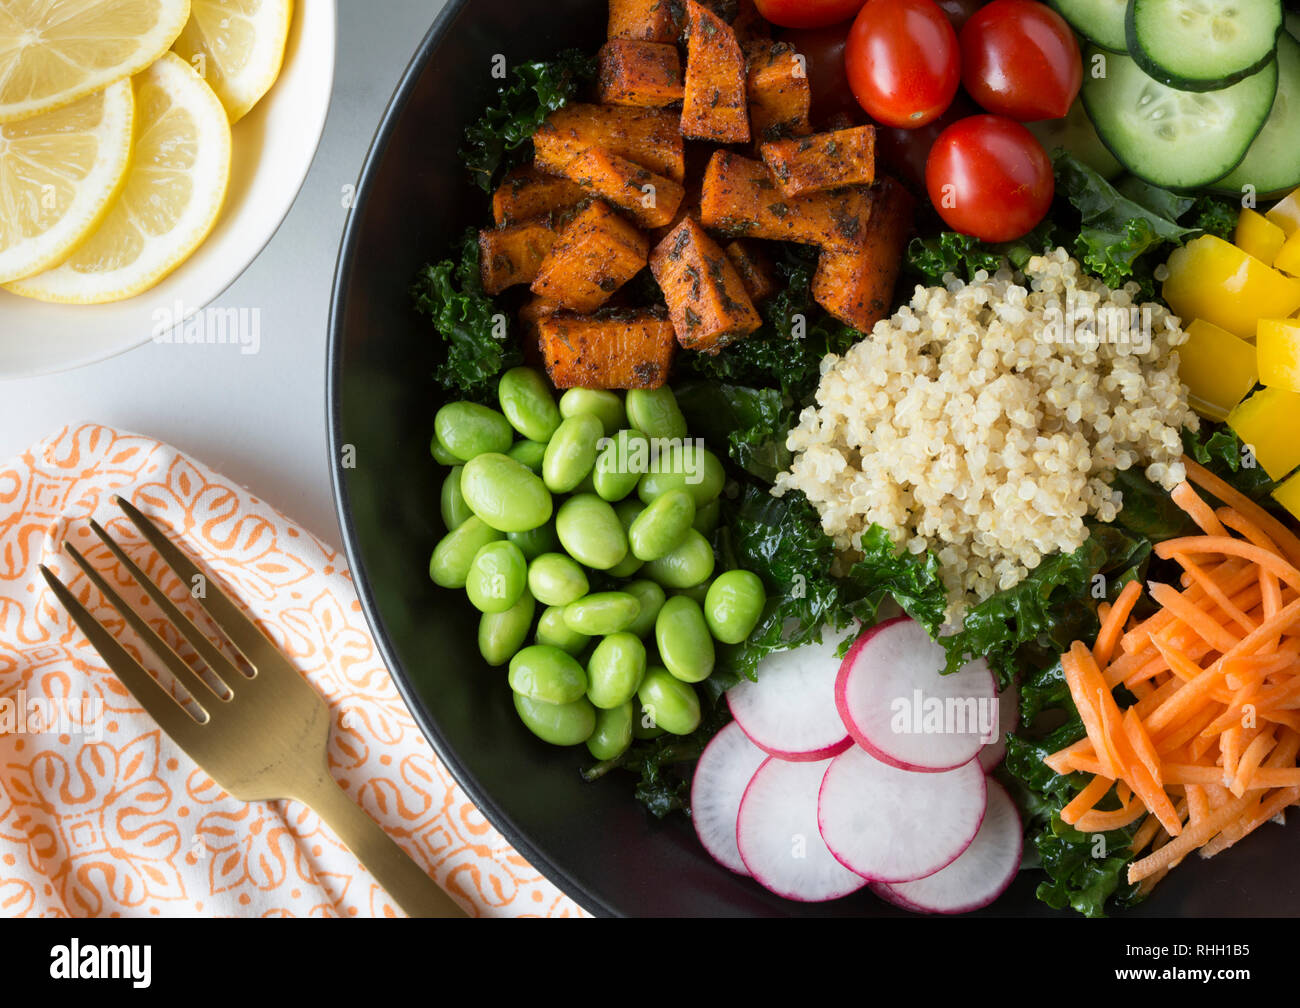 Aerial view of healthy kale salad bowl with vegetables- sweet potatoes, tomatoes, cucumber, bell peppers, carrot, radish, and edamame with quinoa. Stock Photo